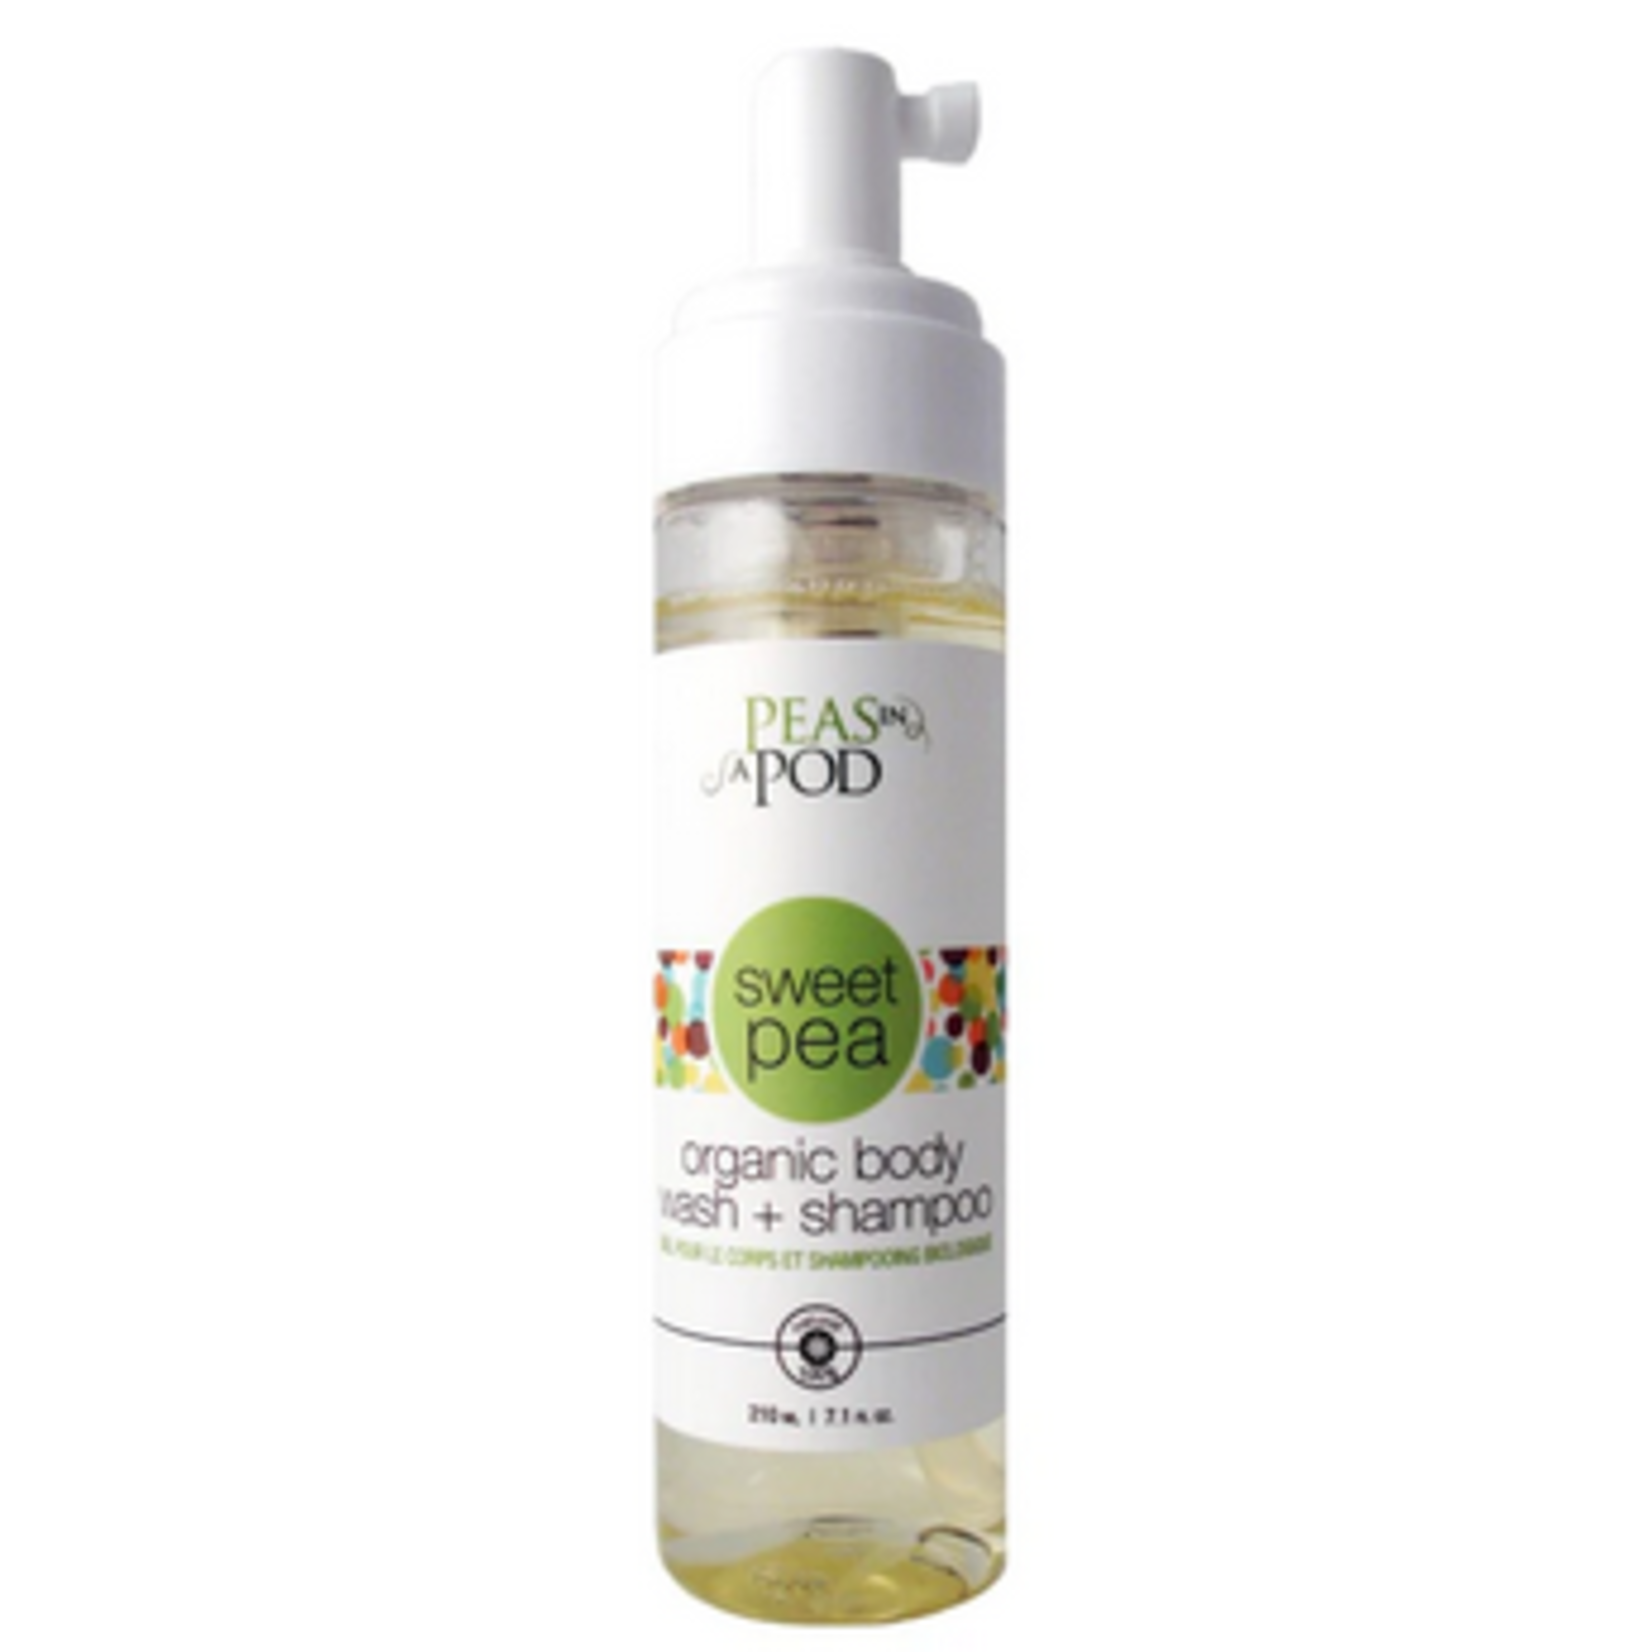 Peas In A Pod by All Things Jill PEAS IN A POD SWEET PEA BABY HAIR AND BODY WASH